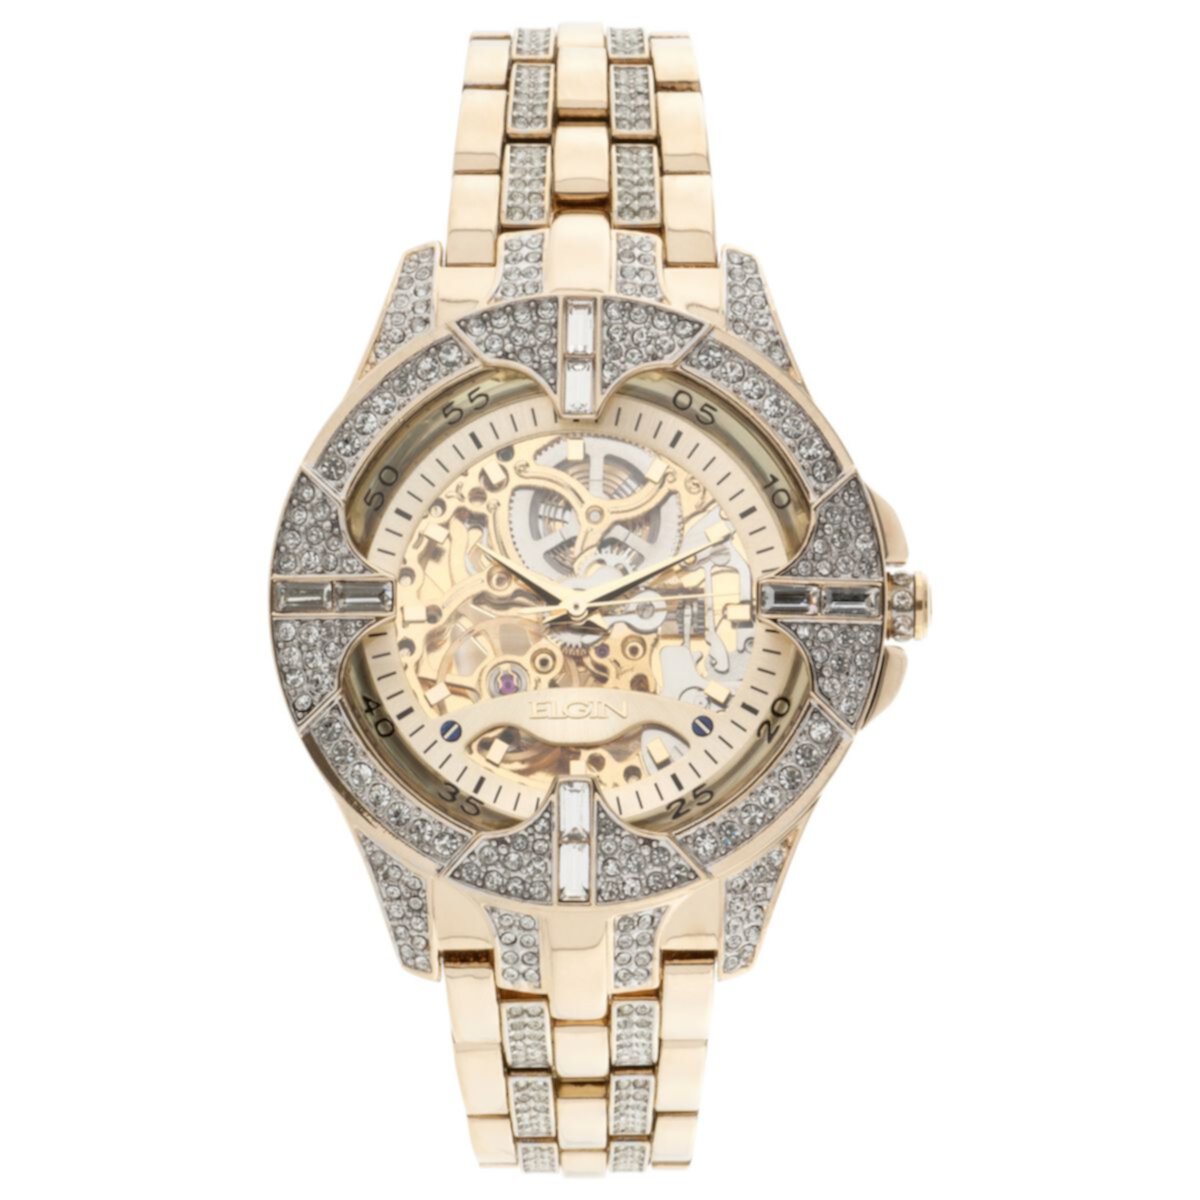 Elgin Men's Gold-Tone Skeleton Dial Watch with Crystal Accents - FG9919KL Elgin